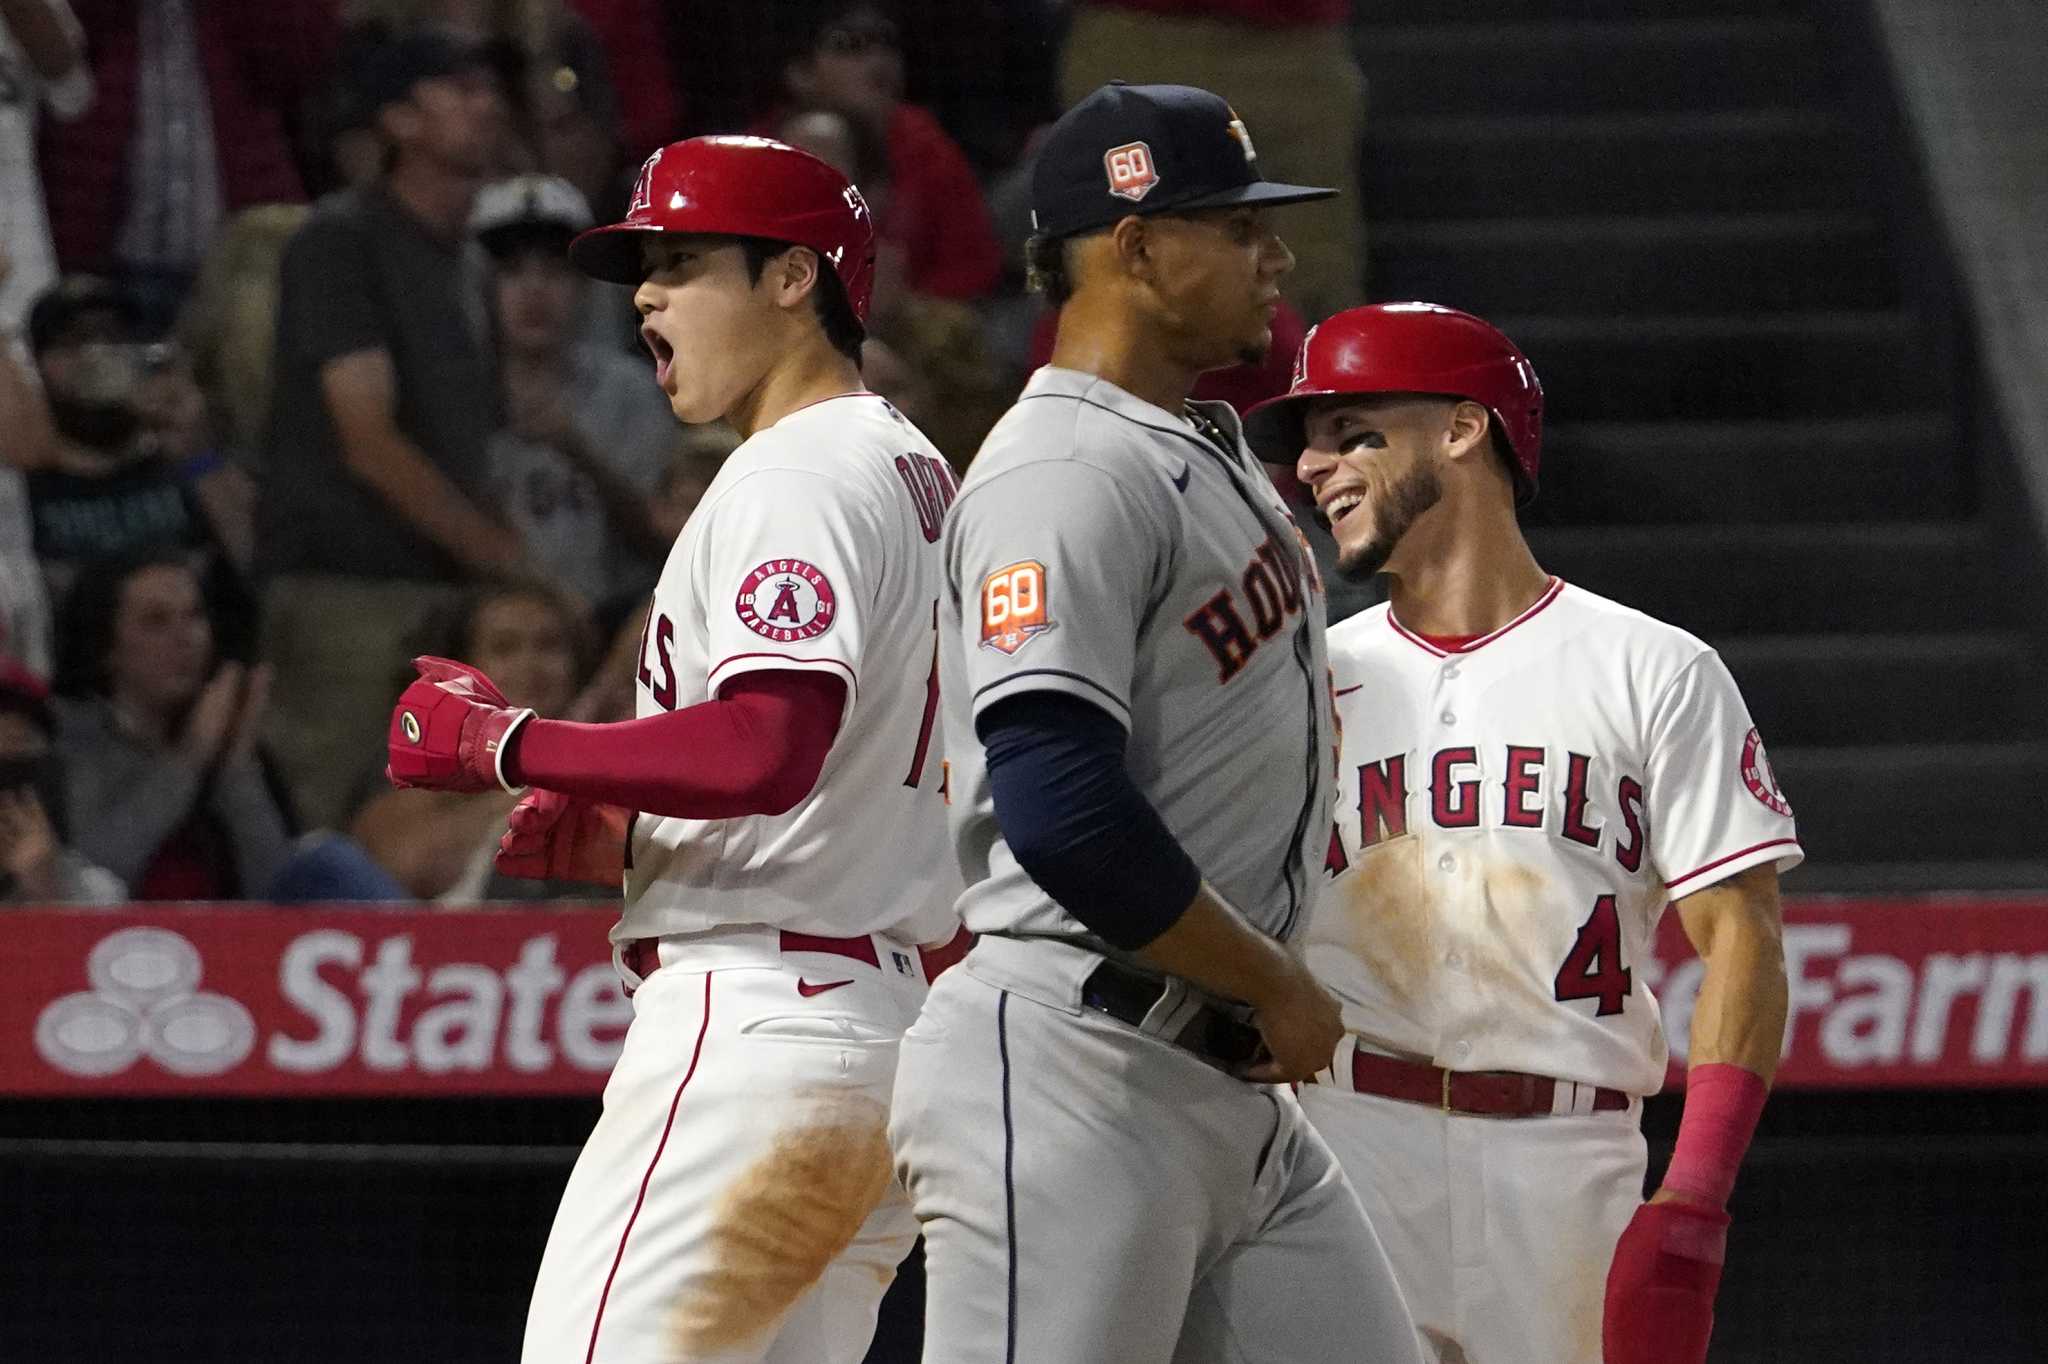 Houston Astros: Shohei Ohtani's brilliance leads Angels to victory